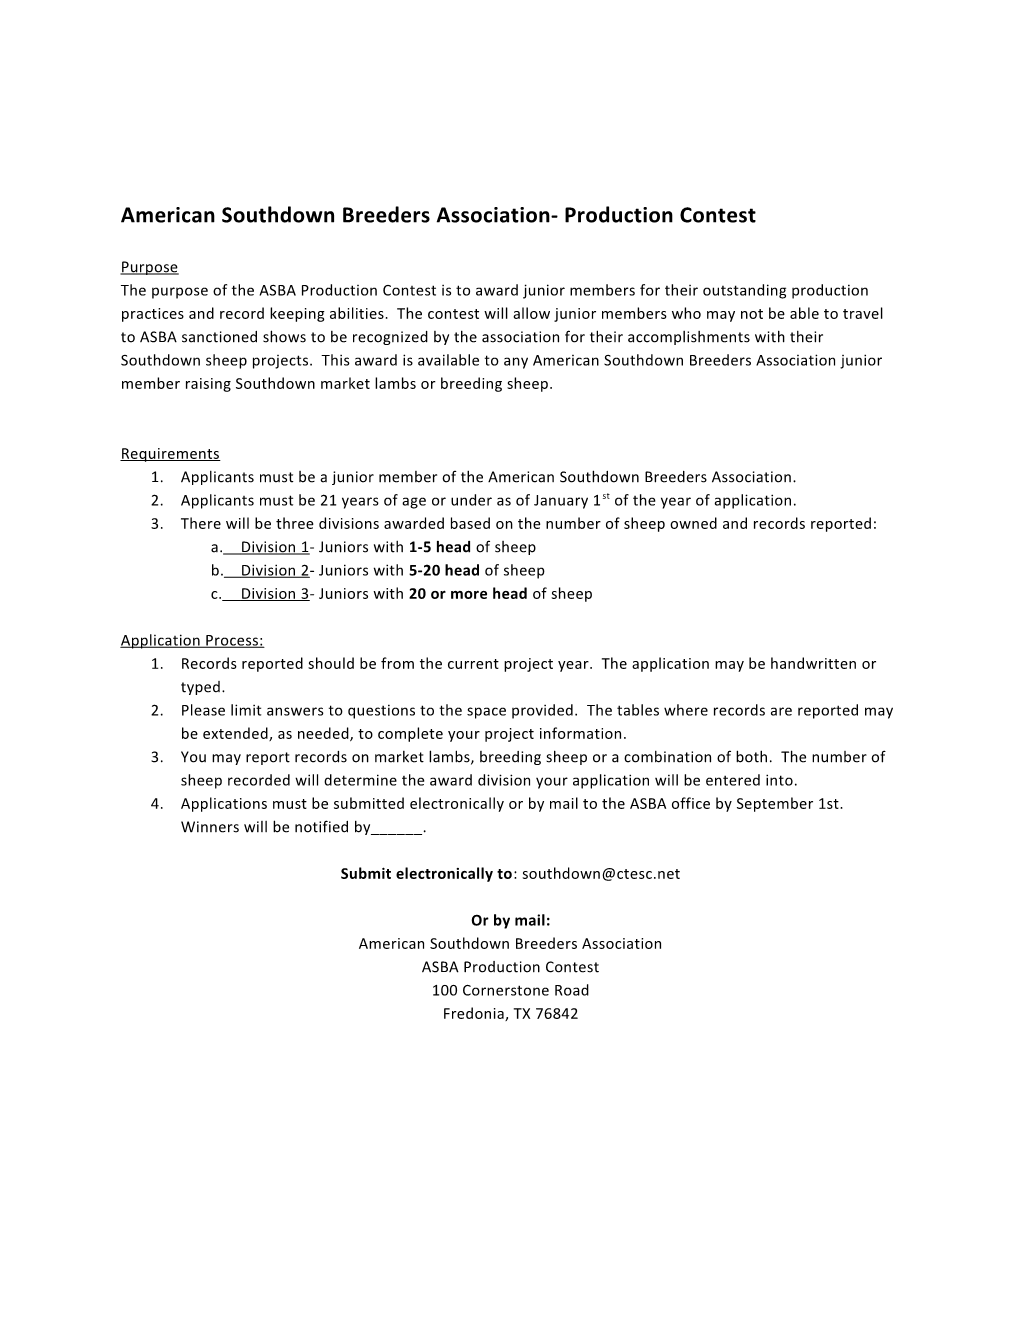 American Southdown Breeders Association- Production Contest